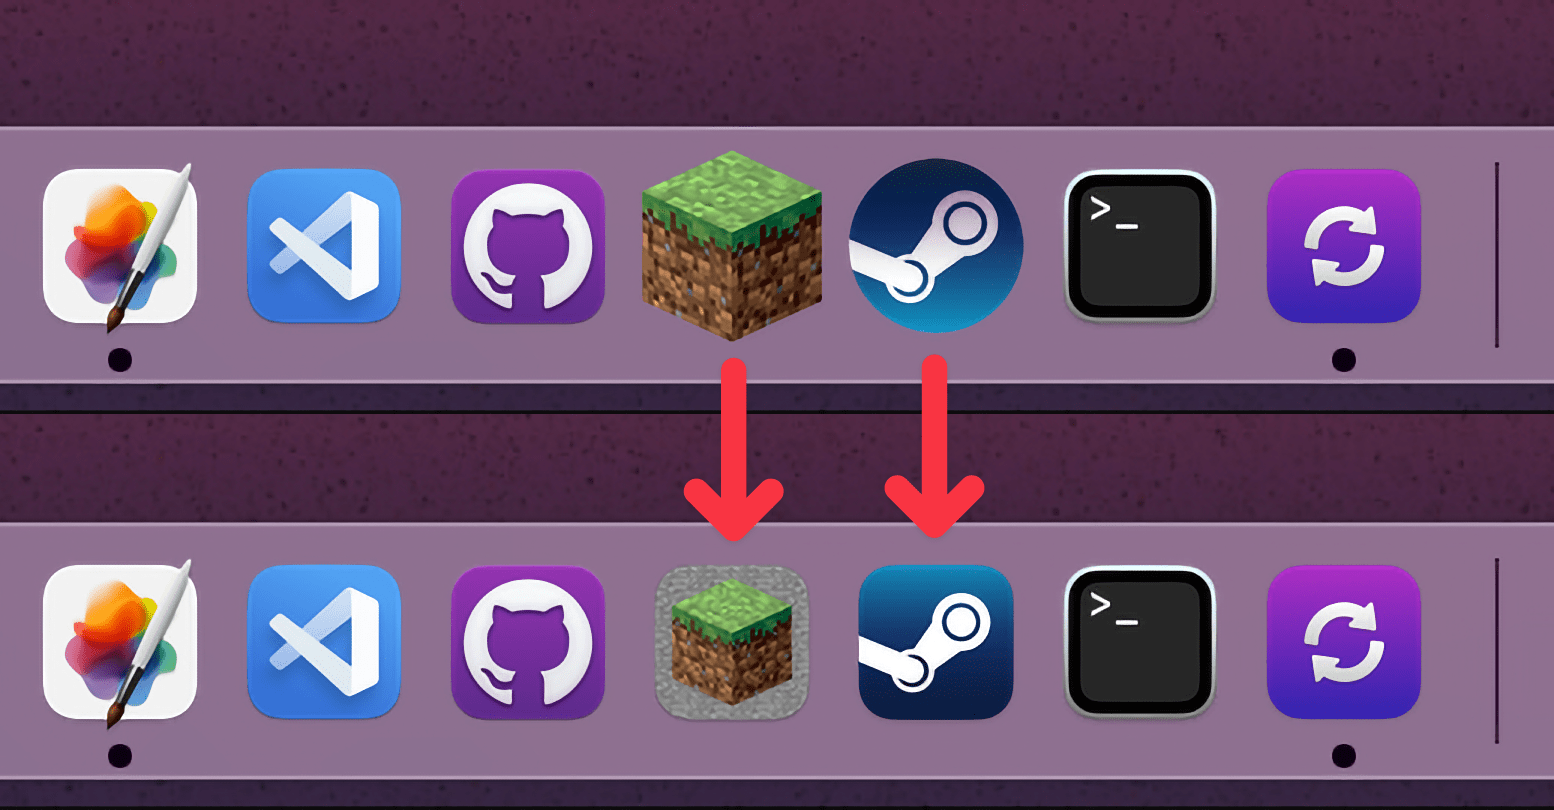 Some apps, like Minecraft and Steam, can look out of place in a sea of rounded squares. Nothing a custom icon can’t fix.